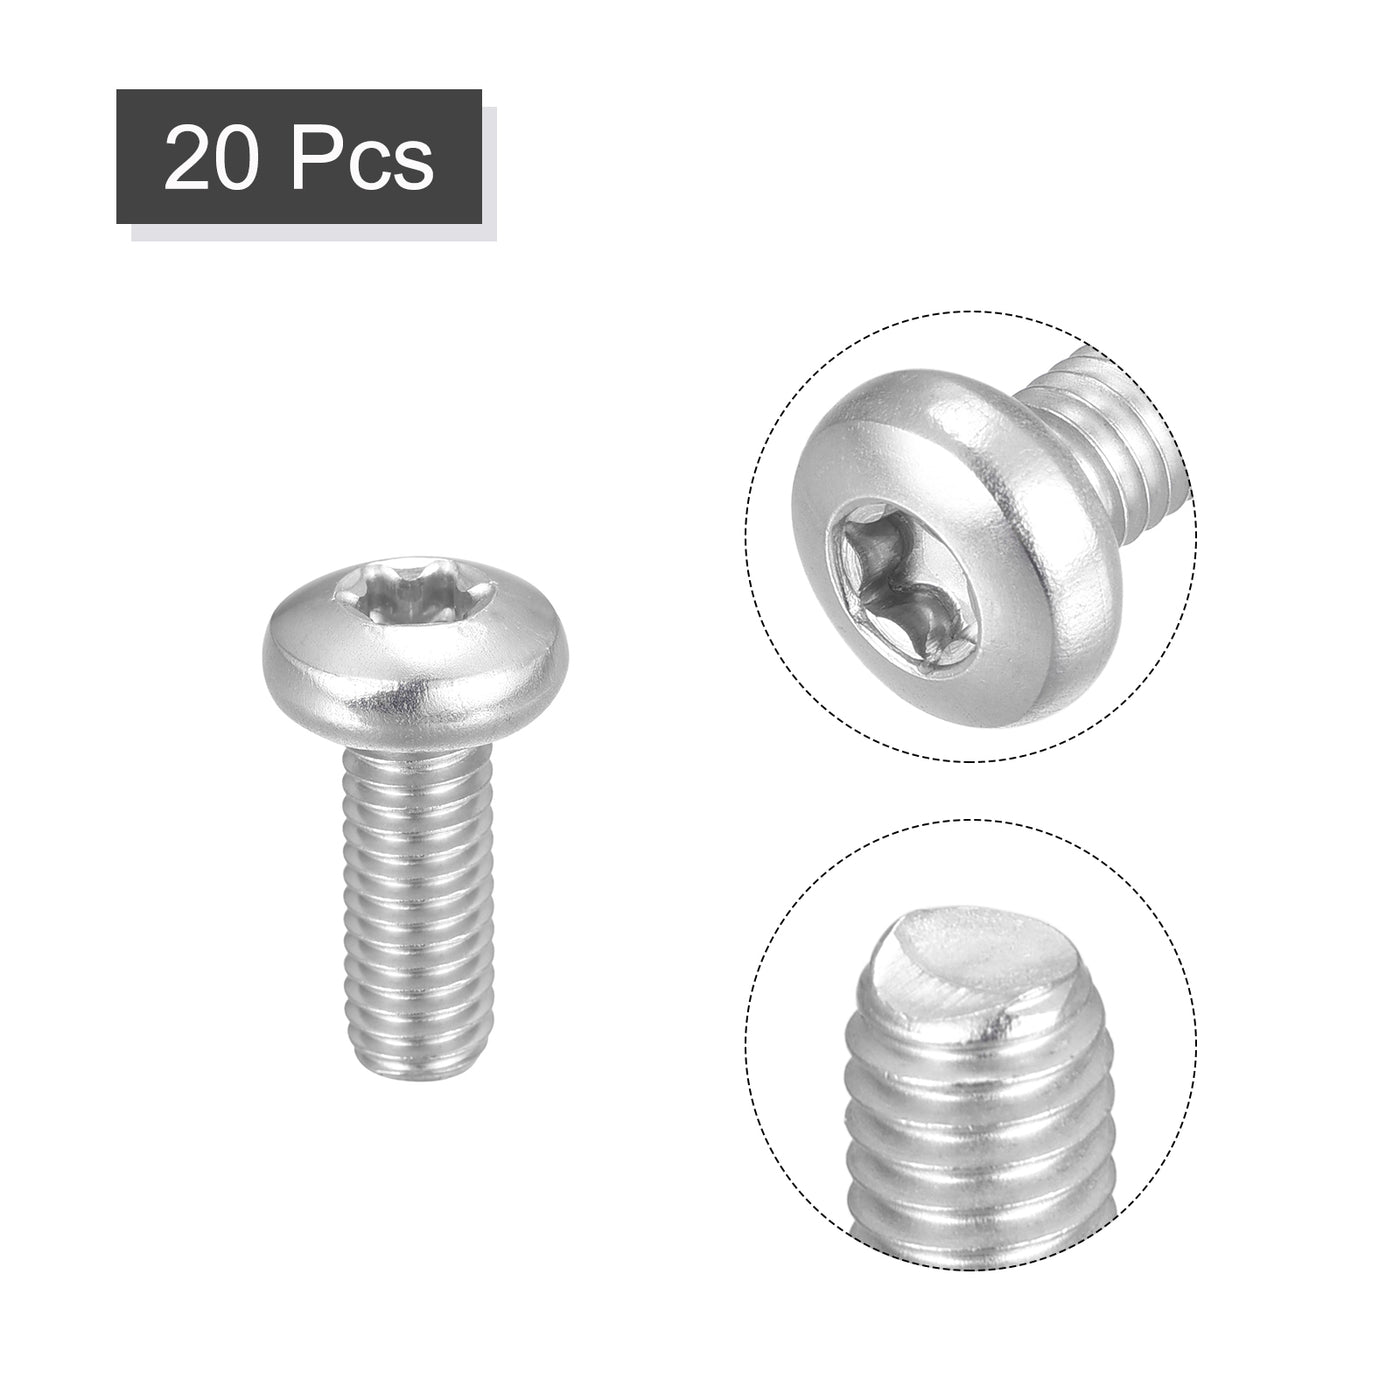 uxcell Uxcell M6x16mm Torx Security Machine Screws, 20pcs 316 Stainless Steel Pan Head Screw